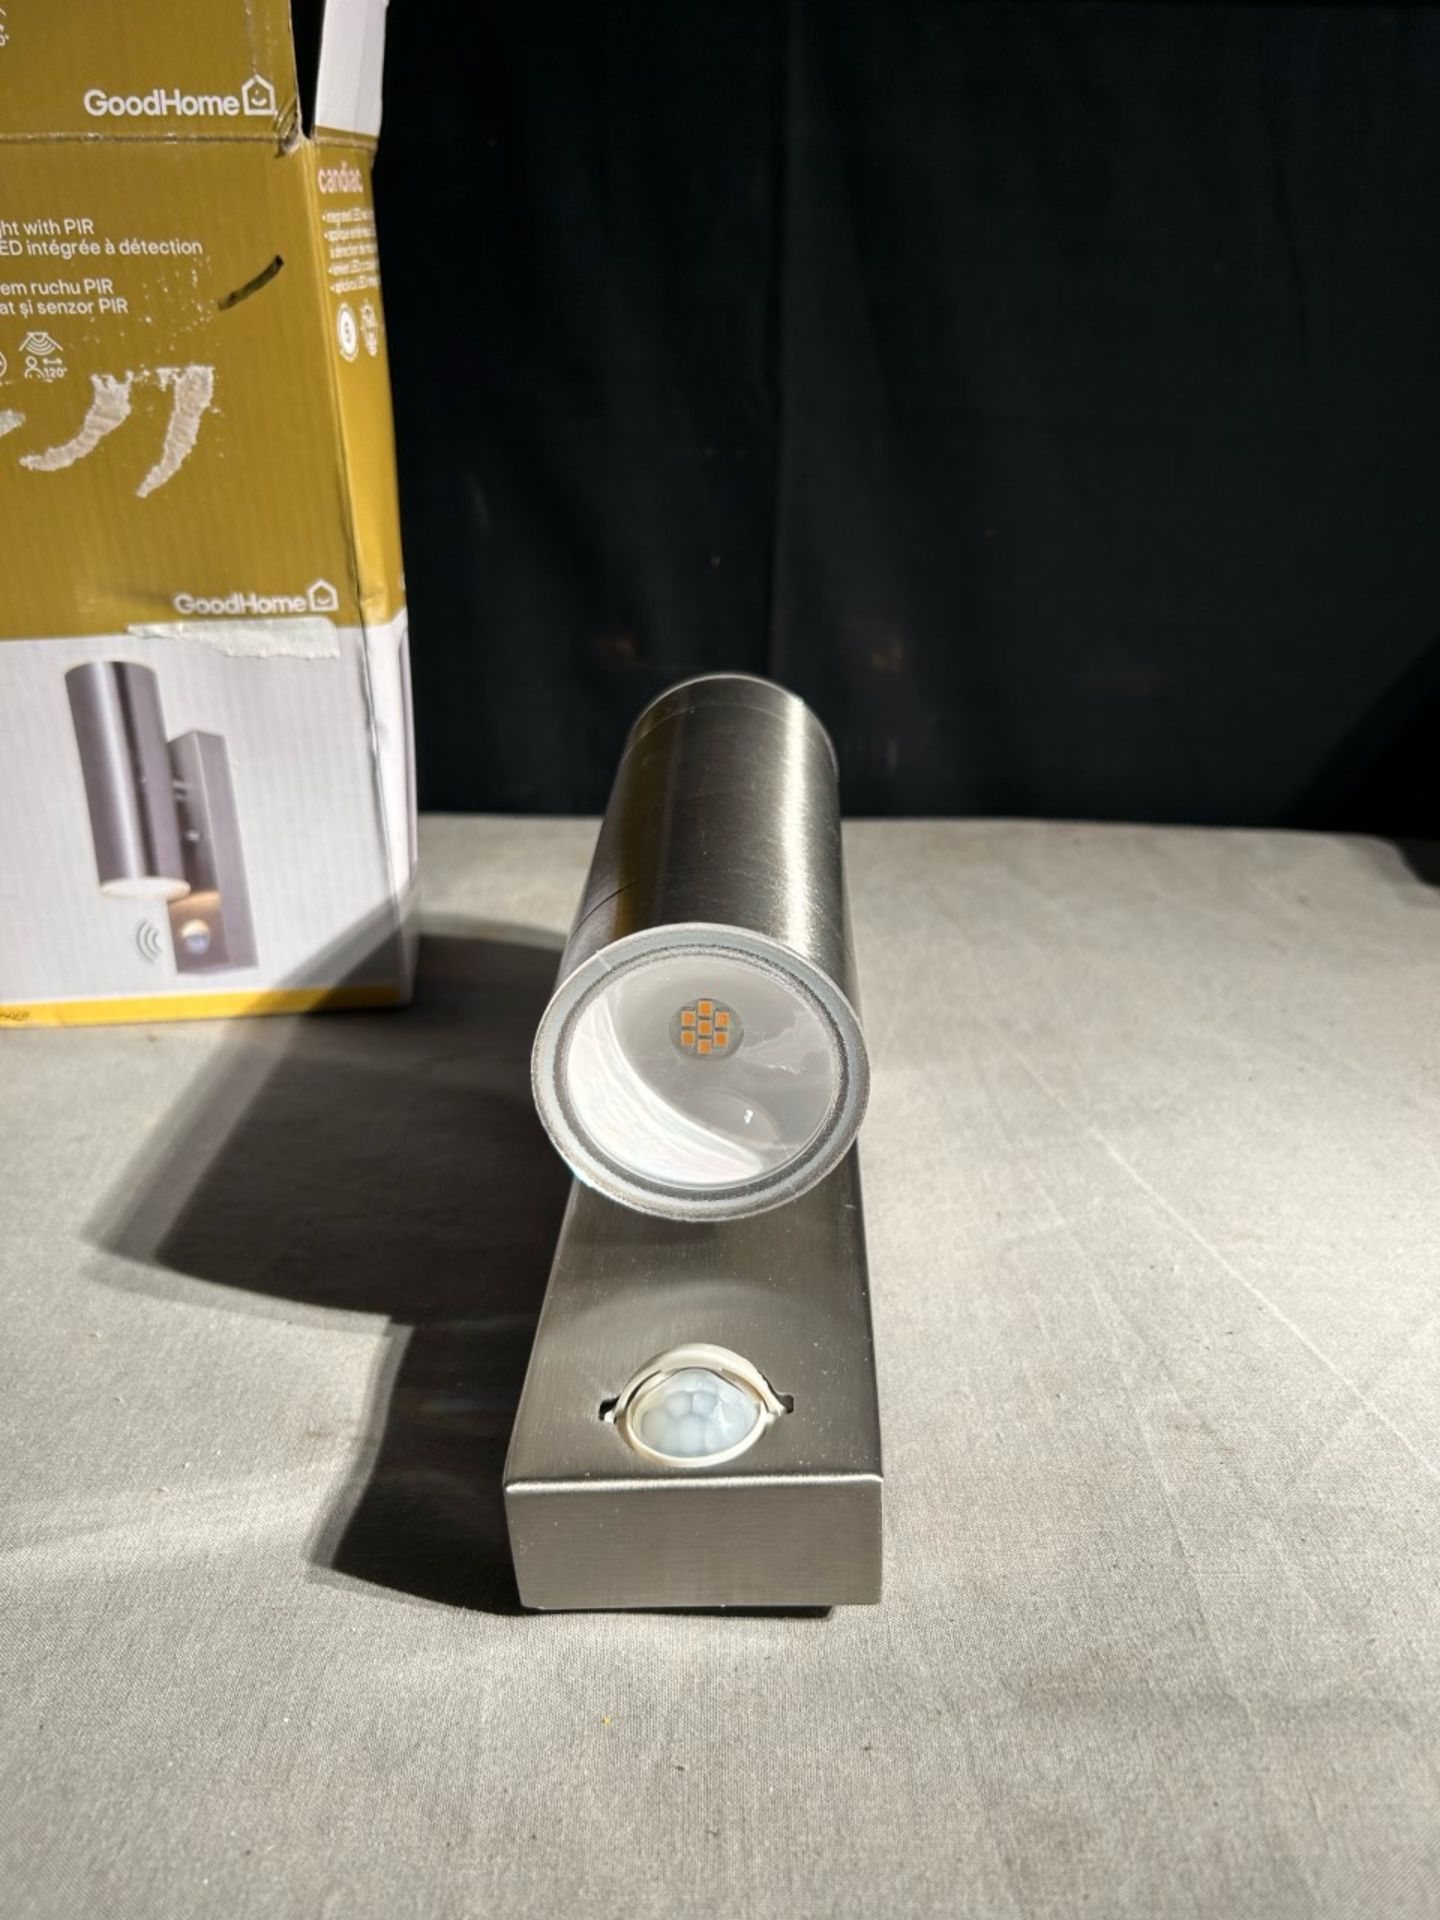 Candiac intergrated wall light new in box - Image 3 of 3